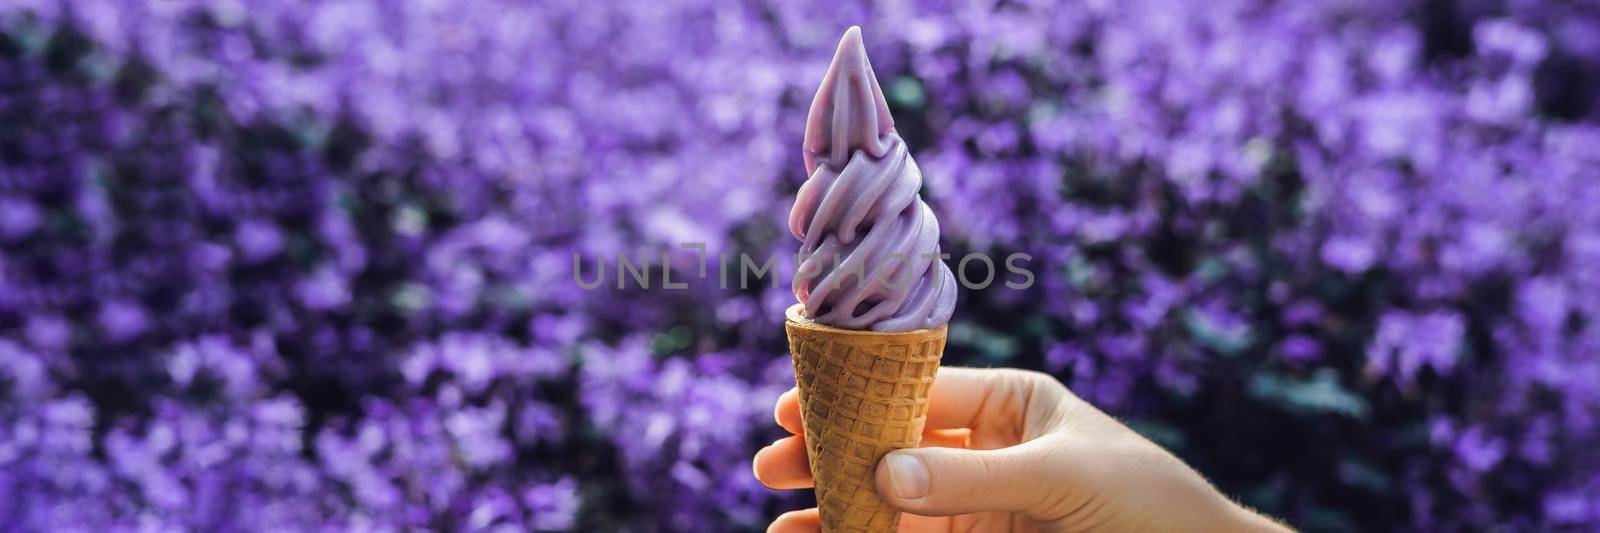 A female hand holds a lavender ice cream on the background of a lavender field BANNER long format by galitskaya